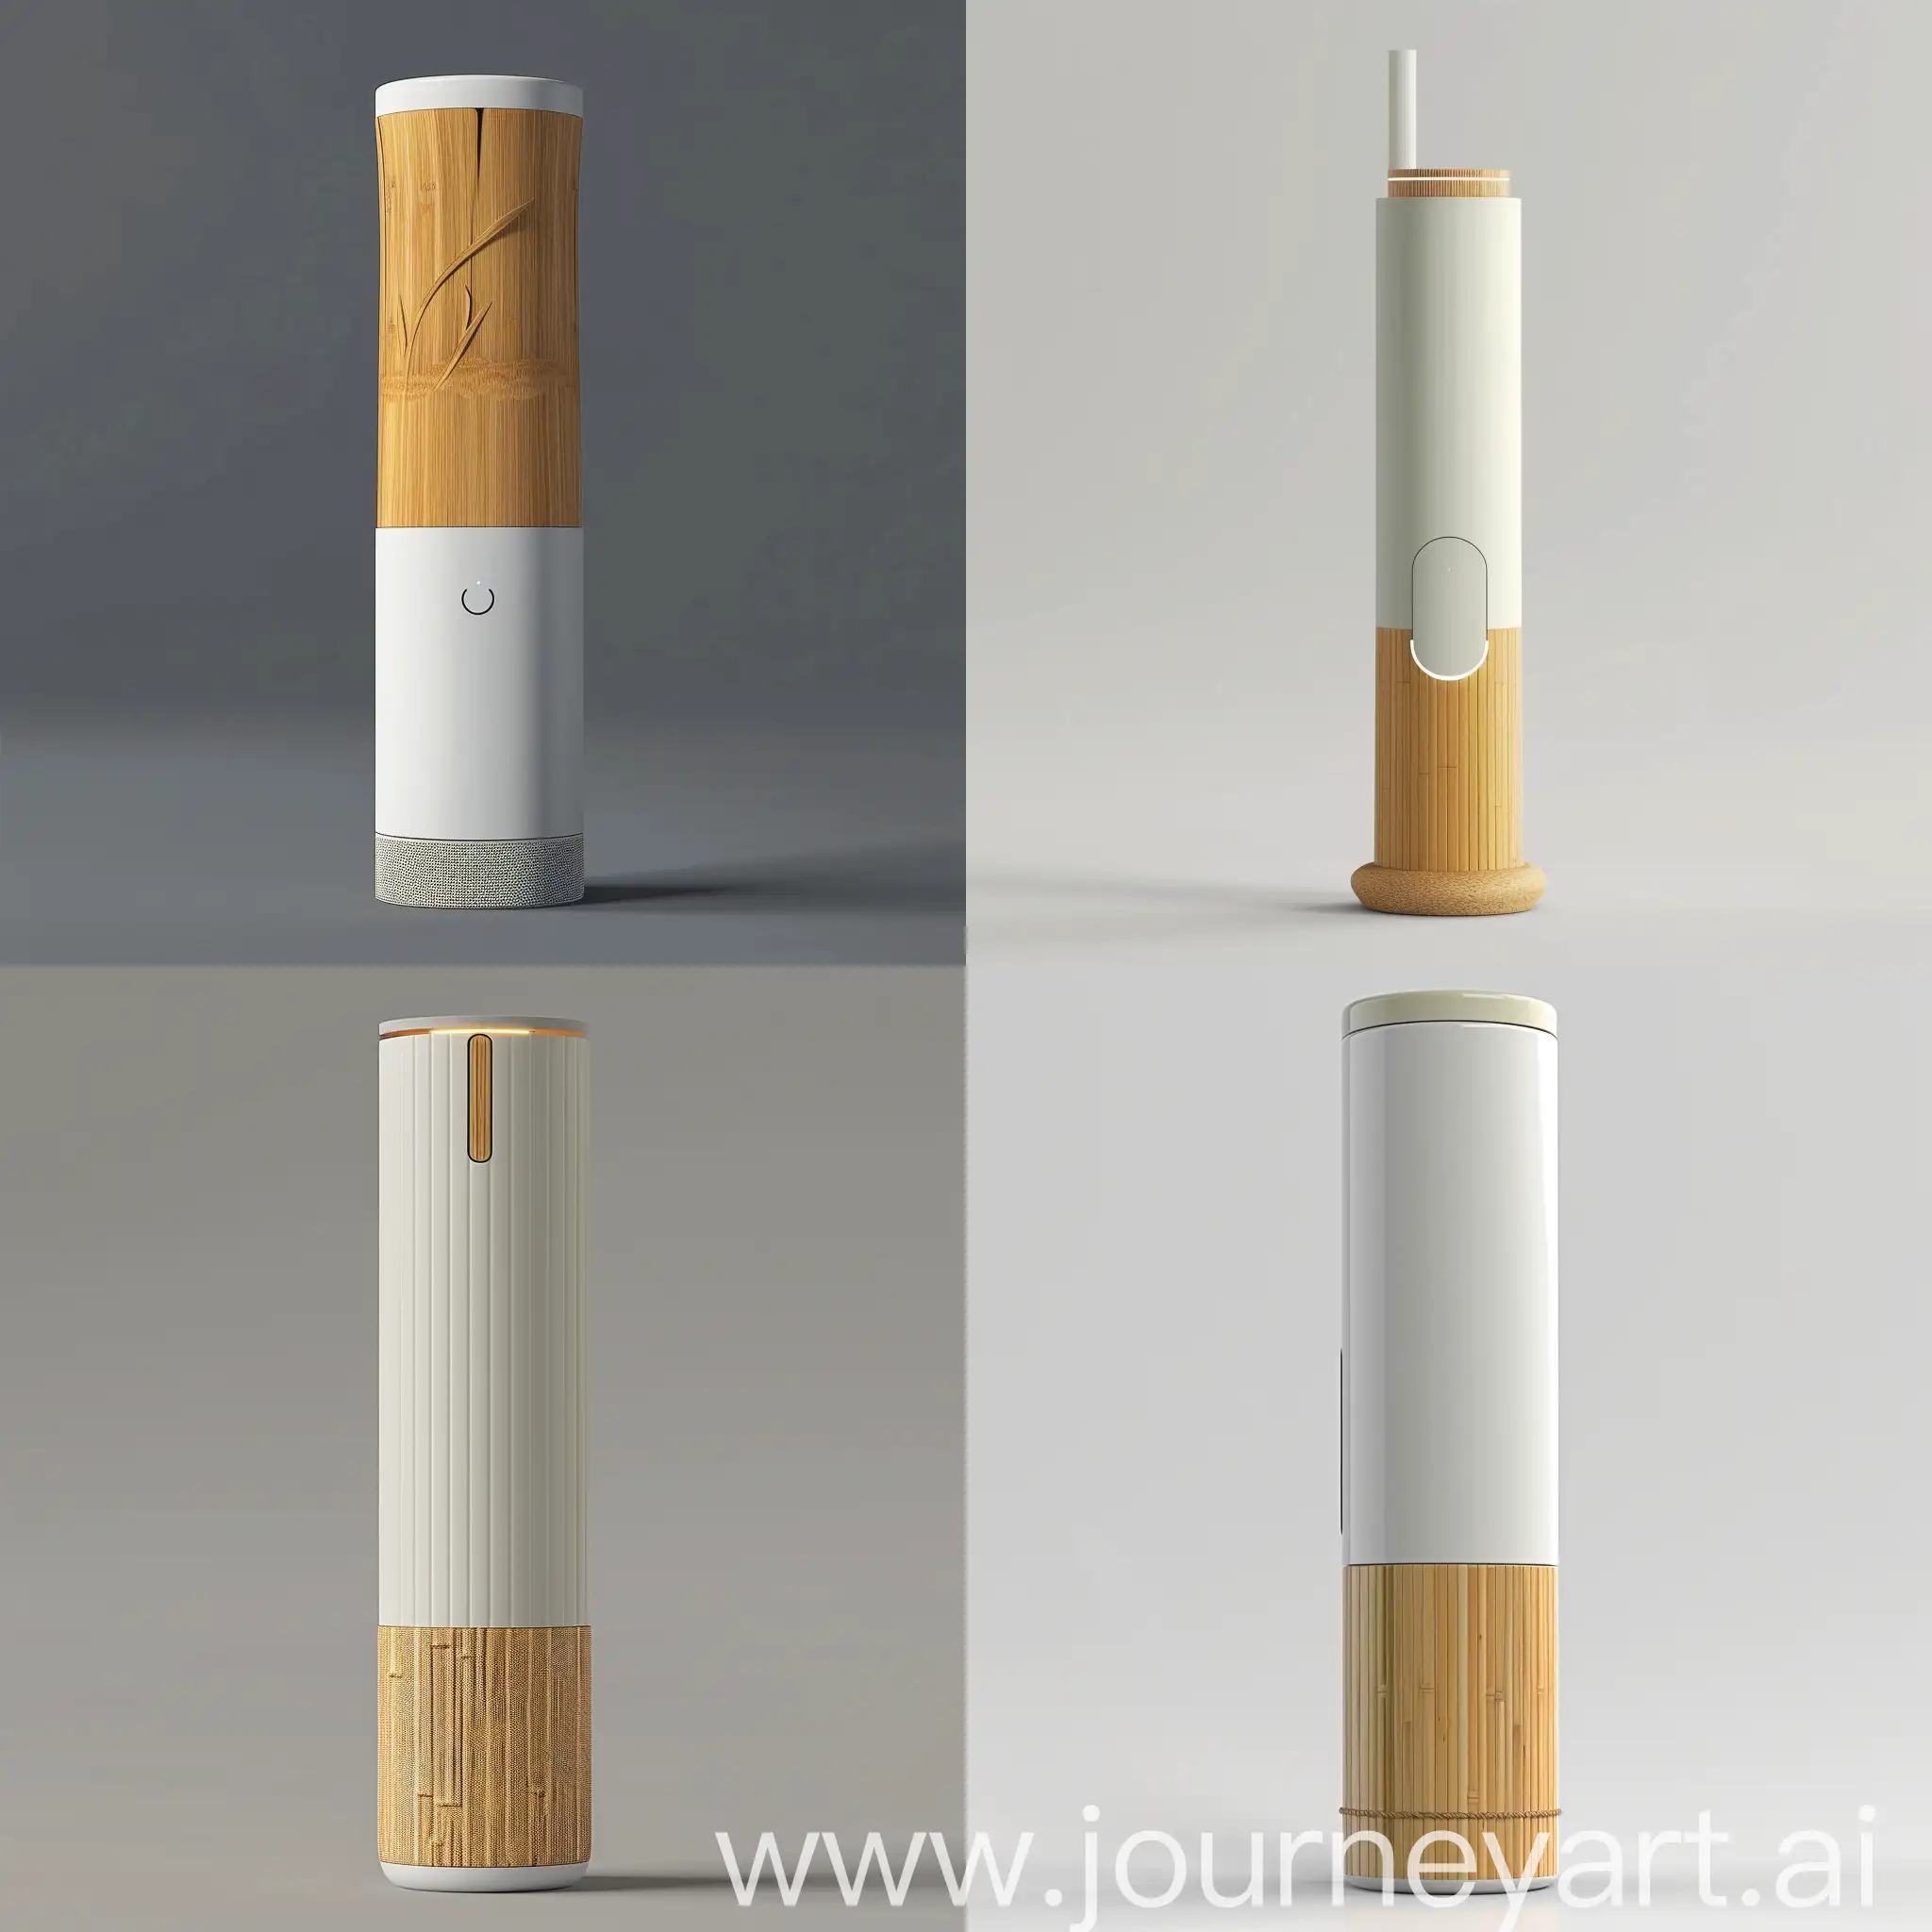 ZenInspired-Smart-Energy-Management-Device-with-Bamboo-Aesthetic